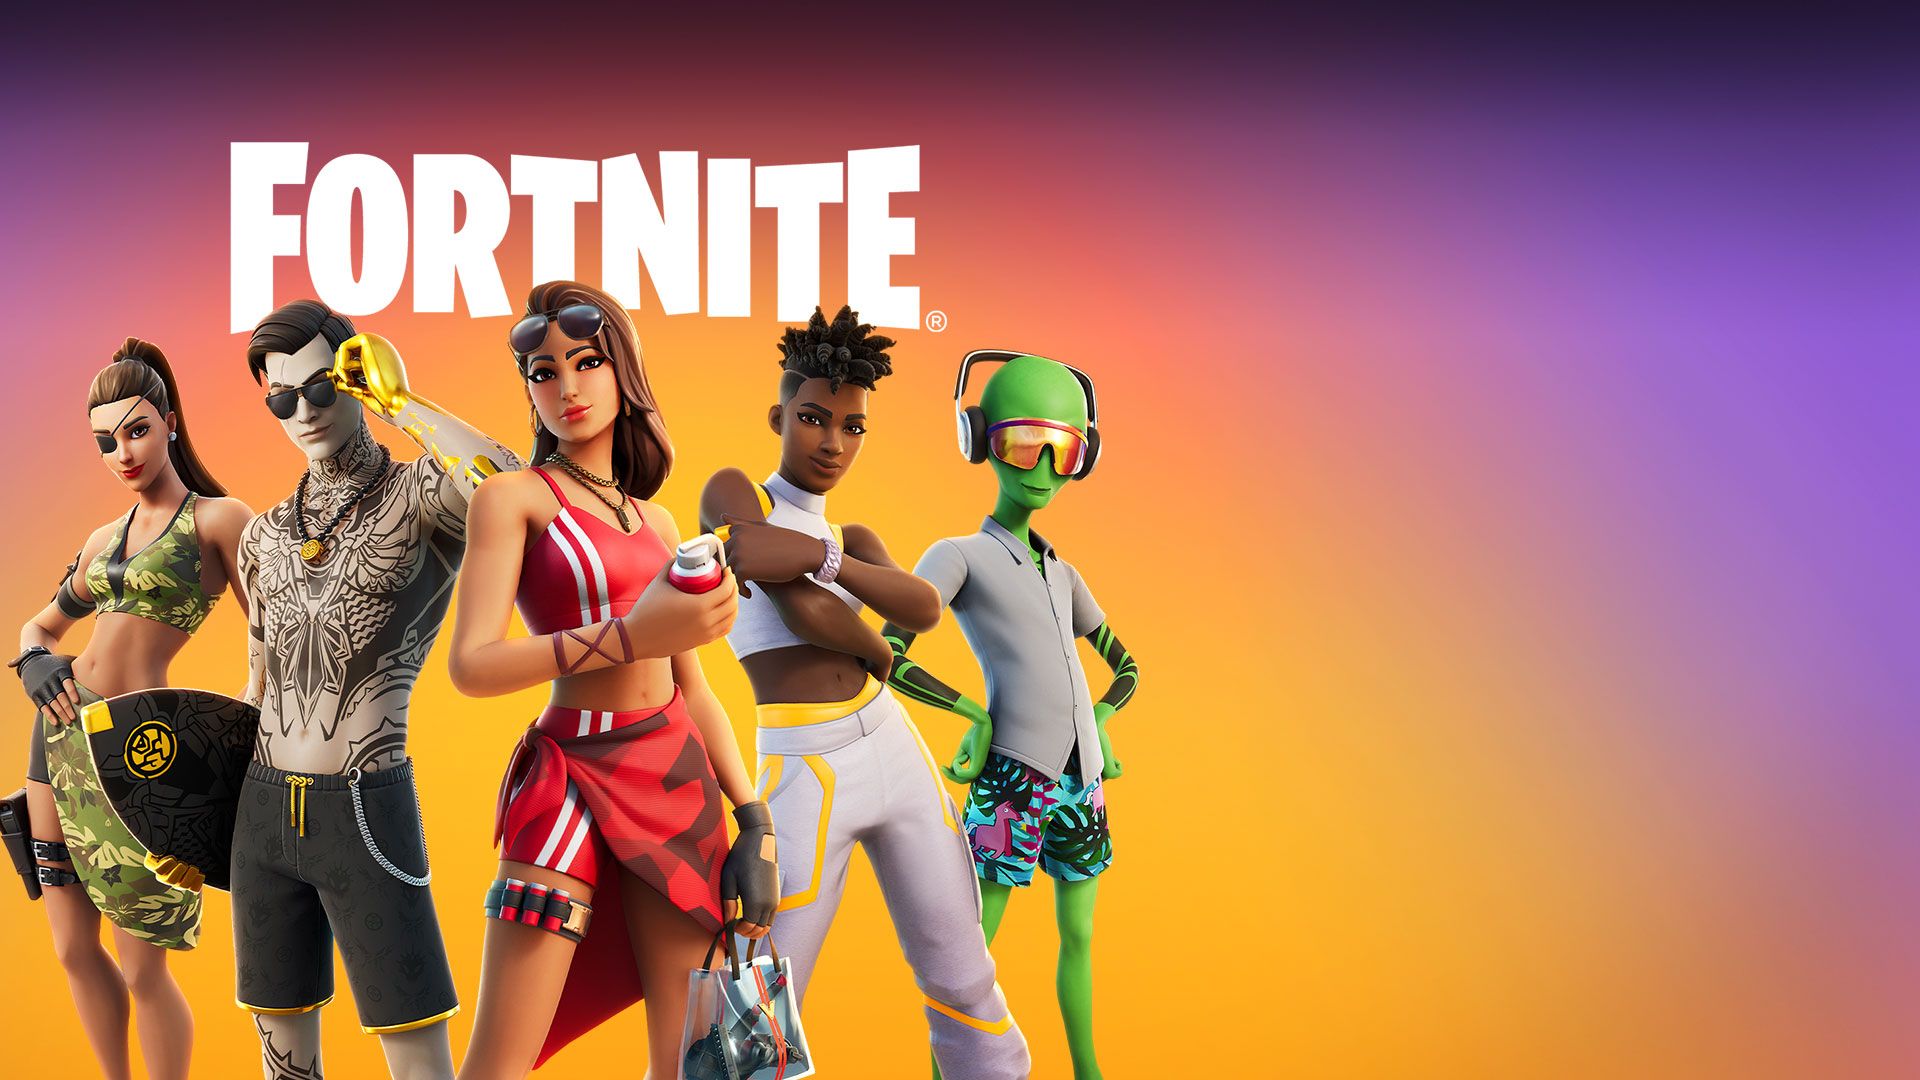 Save the World Soars: Fortnite's PVE Mode Hits All-Time Player